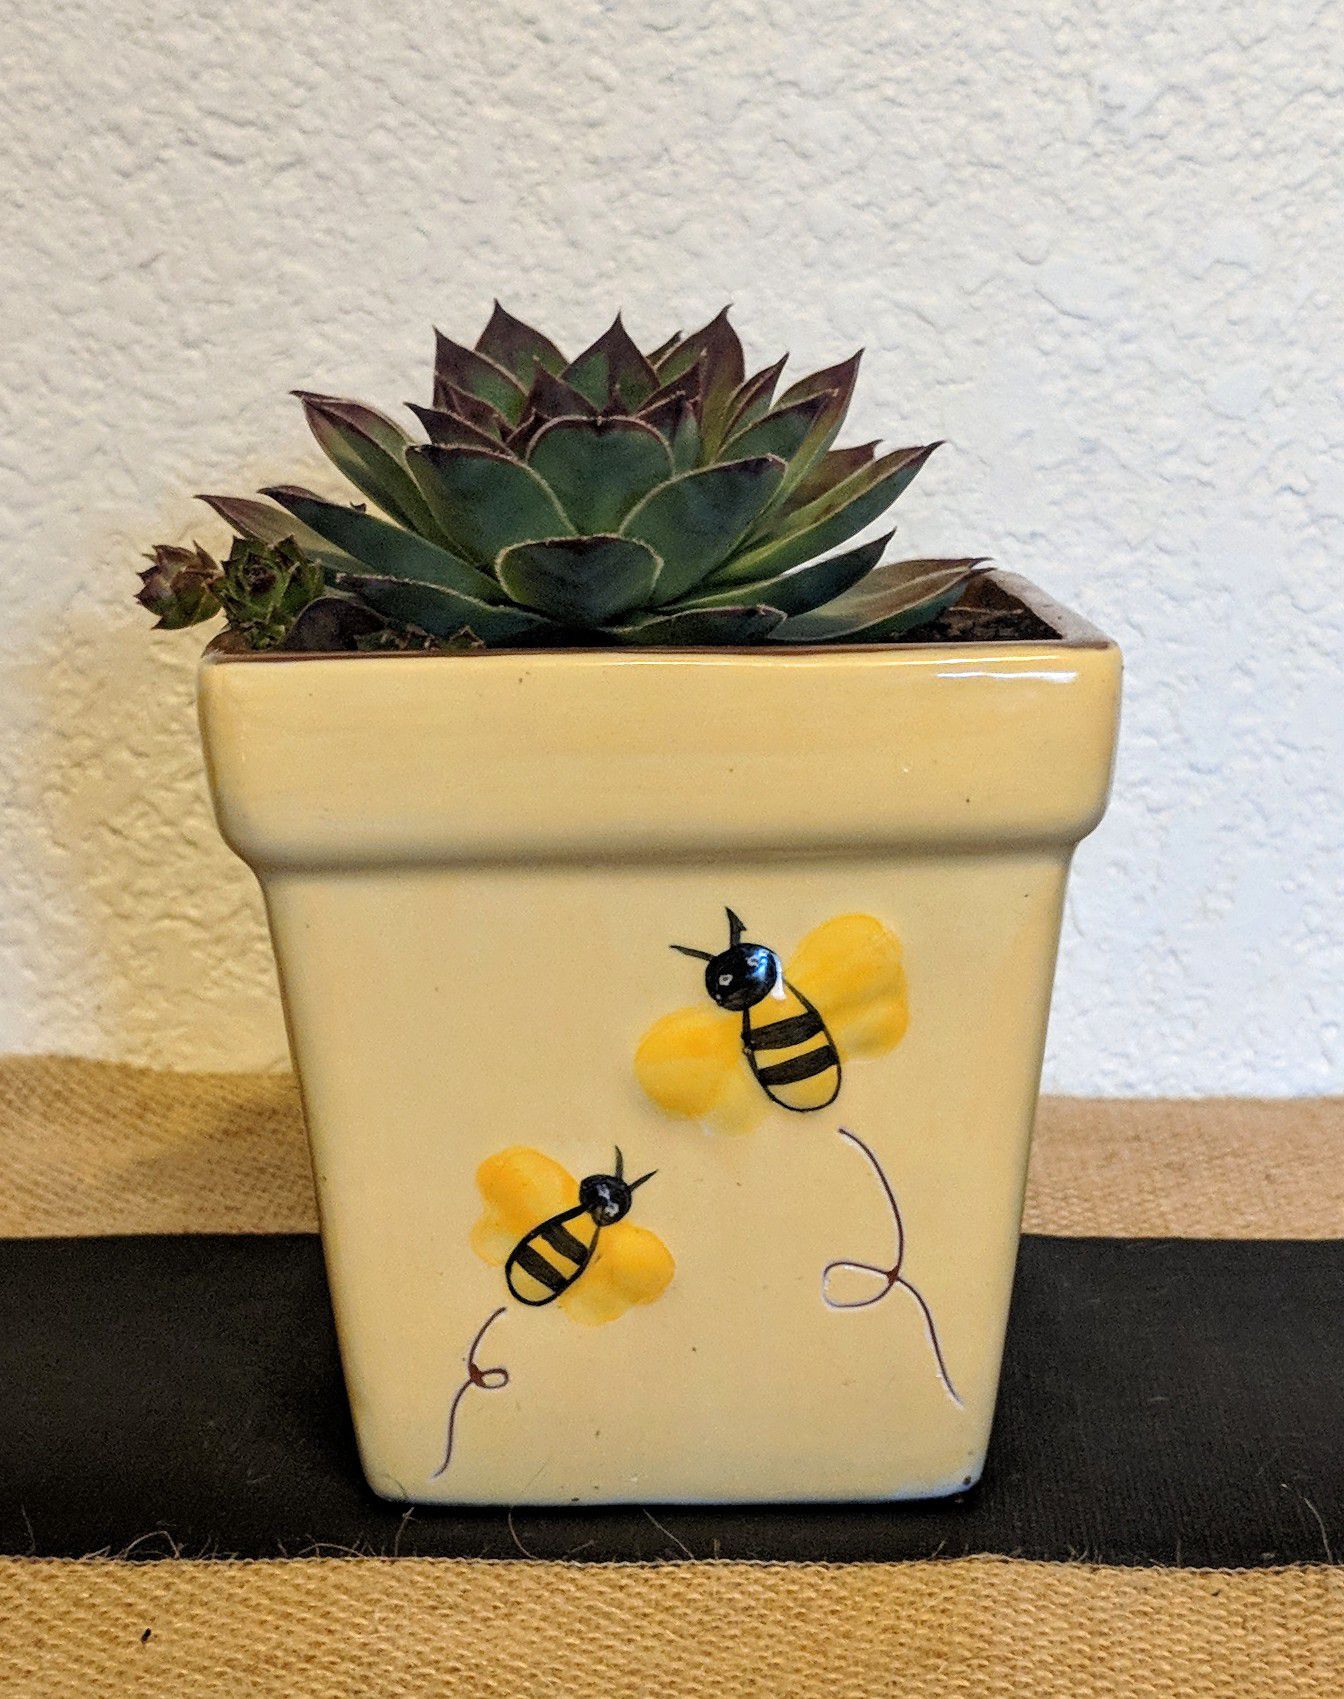 4" yellow ceramic glazed planter with bees & succulent plant